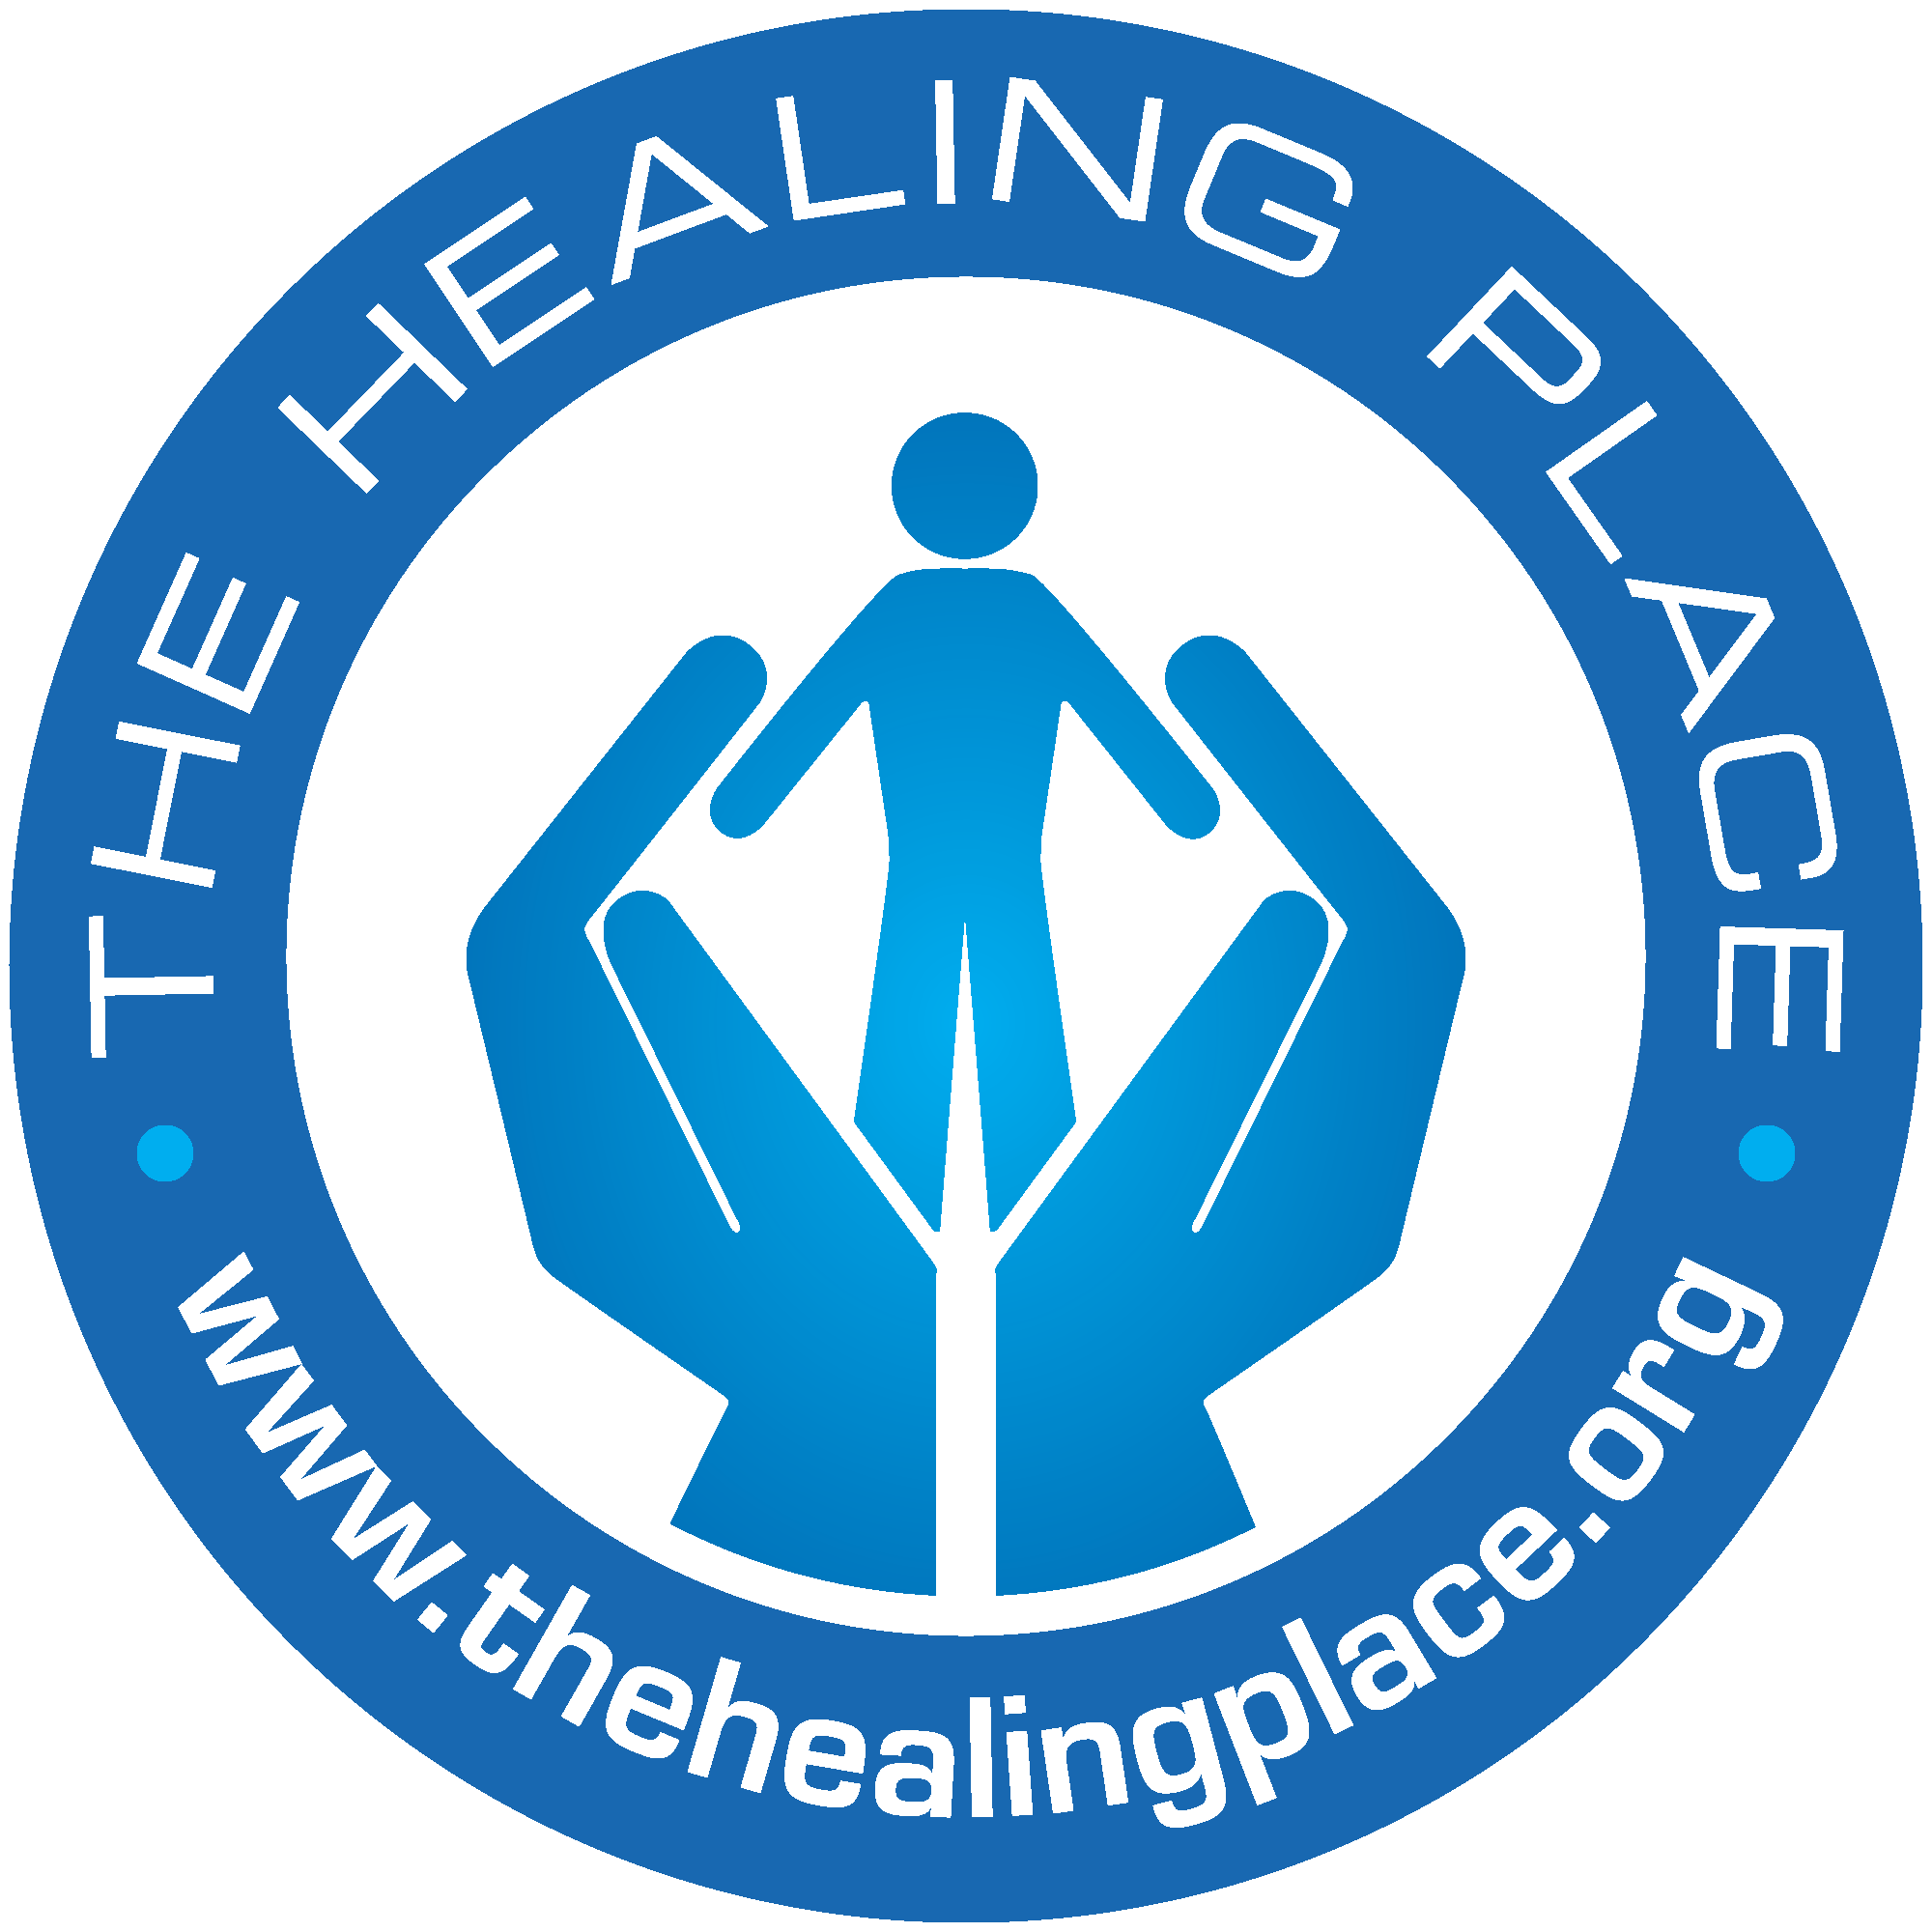 The Healing Place for Women